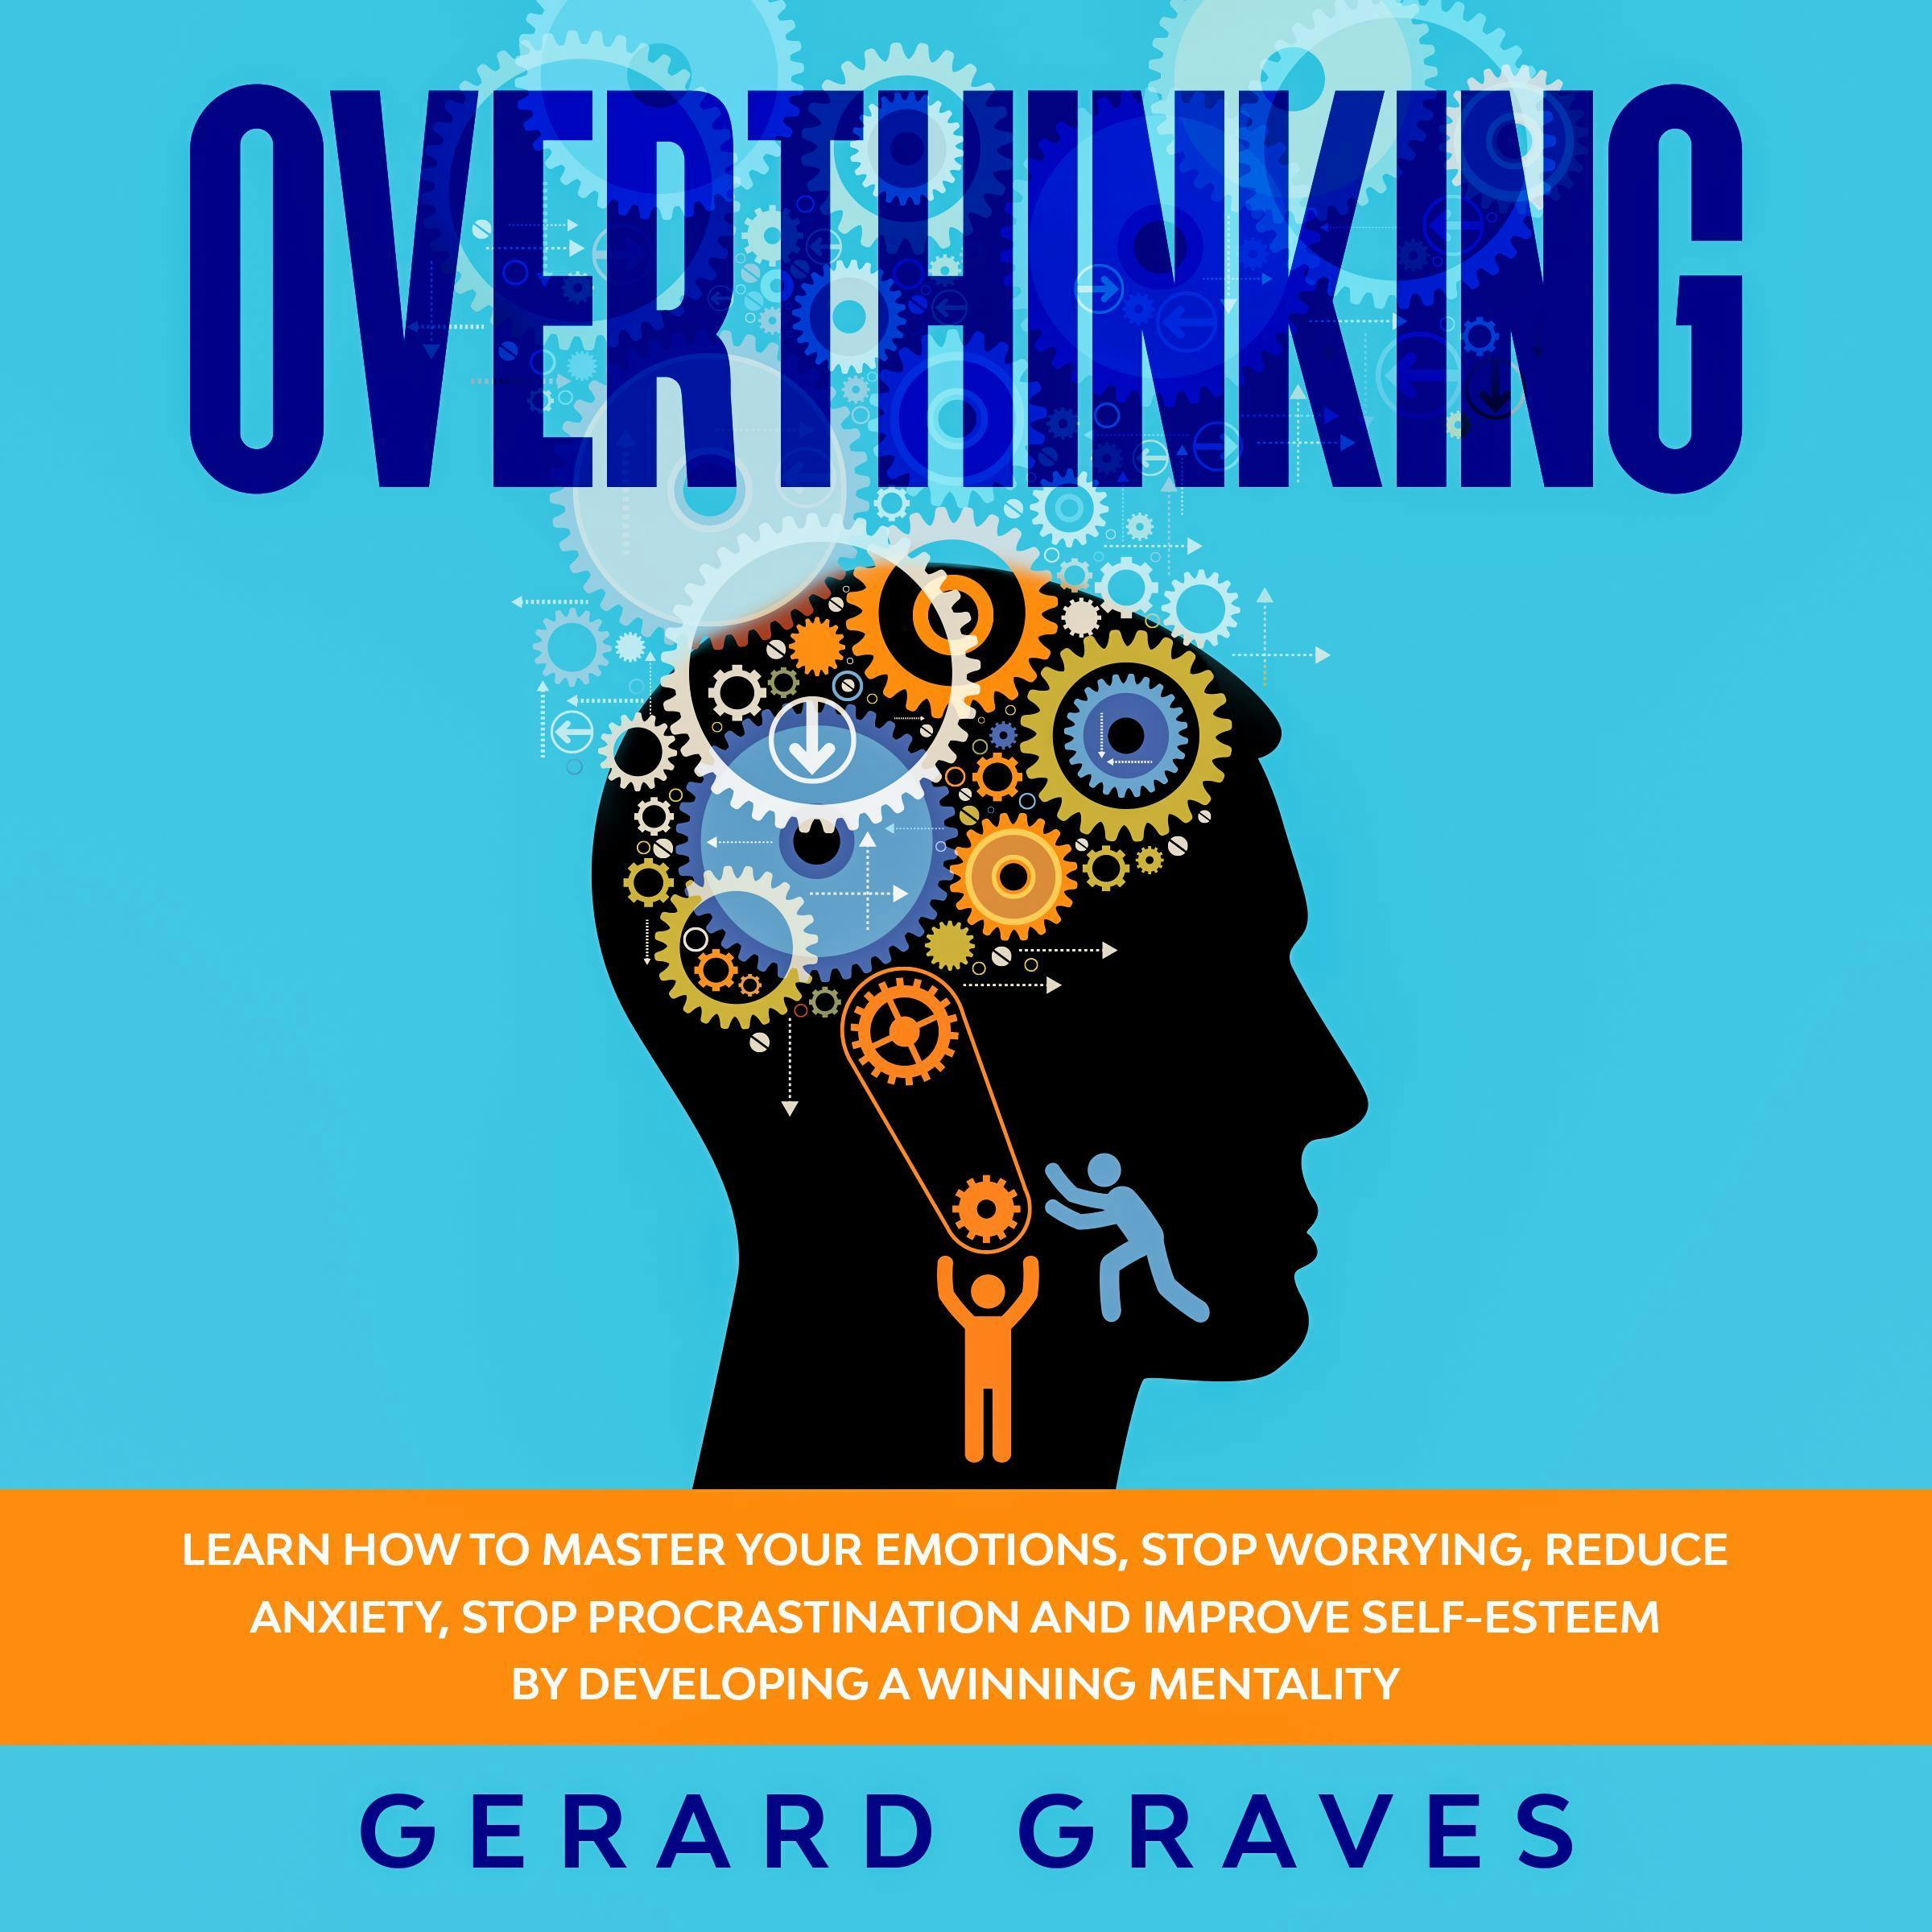 Overthinking: Learn How to Master Your Emotions, Stop Worrying, Reduce Anxiety, Stop Procrastination, and Improve Self-Esteem by Developing a Winning Mentality - Gerard Graves